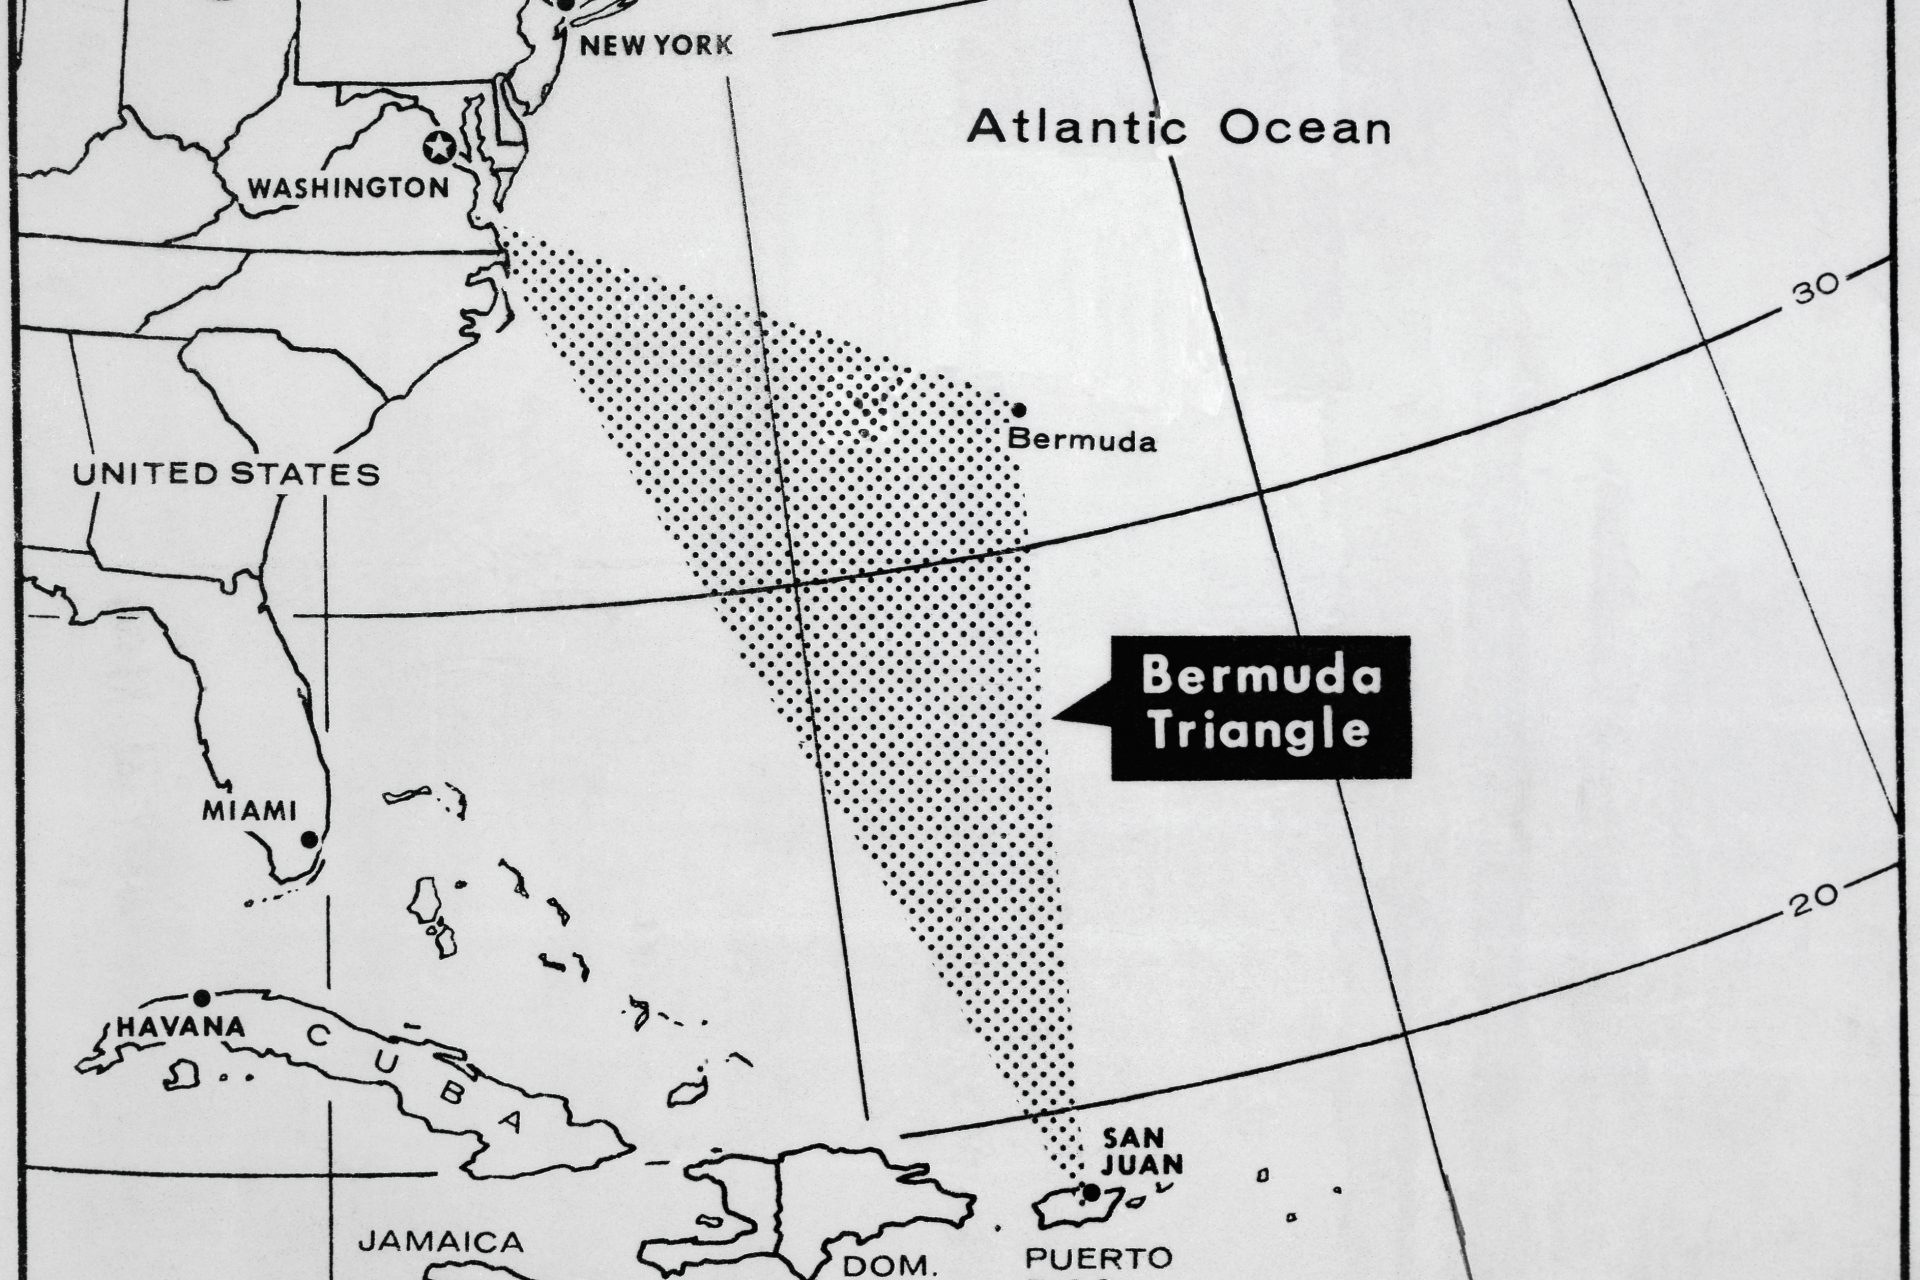 <p>In an interview given by Charles Berlitz in 1977 to The New York Times, he talked about how the weather changes when entering the Bermuda Triangle. And he said that there are pilots who fly, what they think are a few minutes, only to find that the tank is empty because hours have passed.</p>